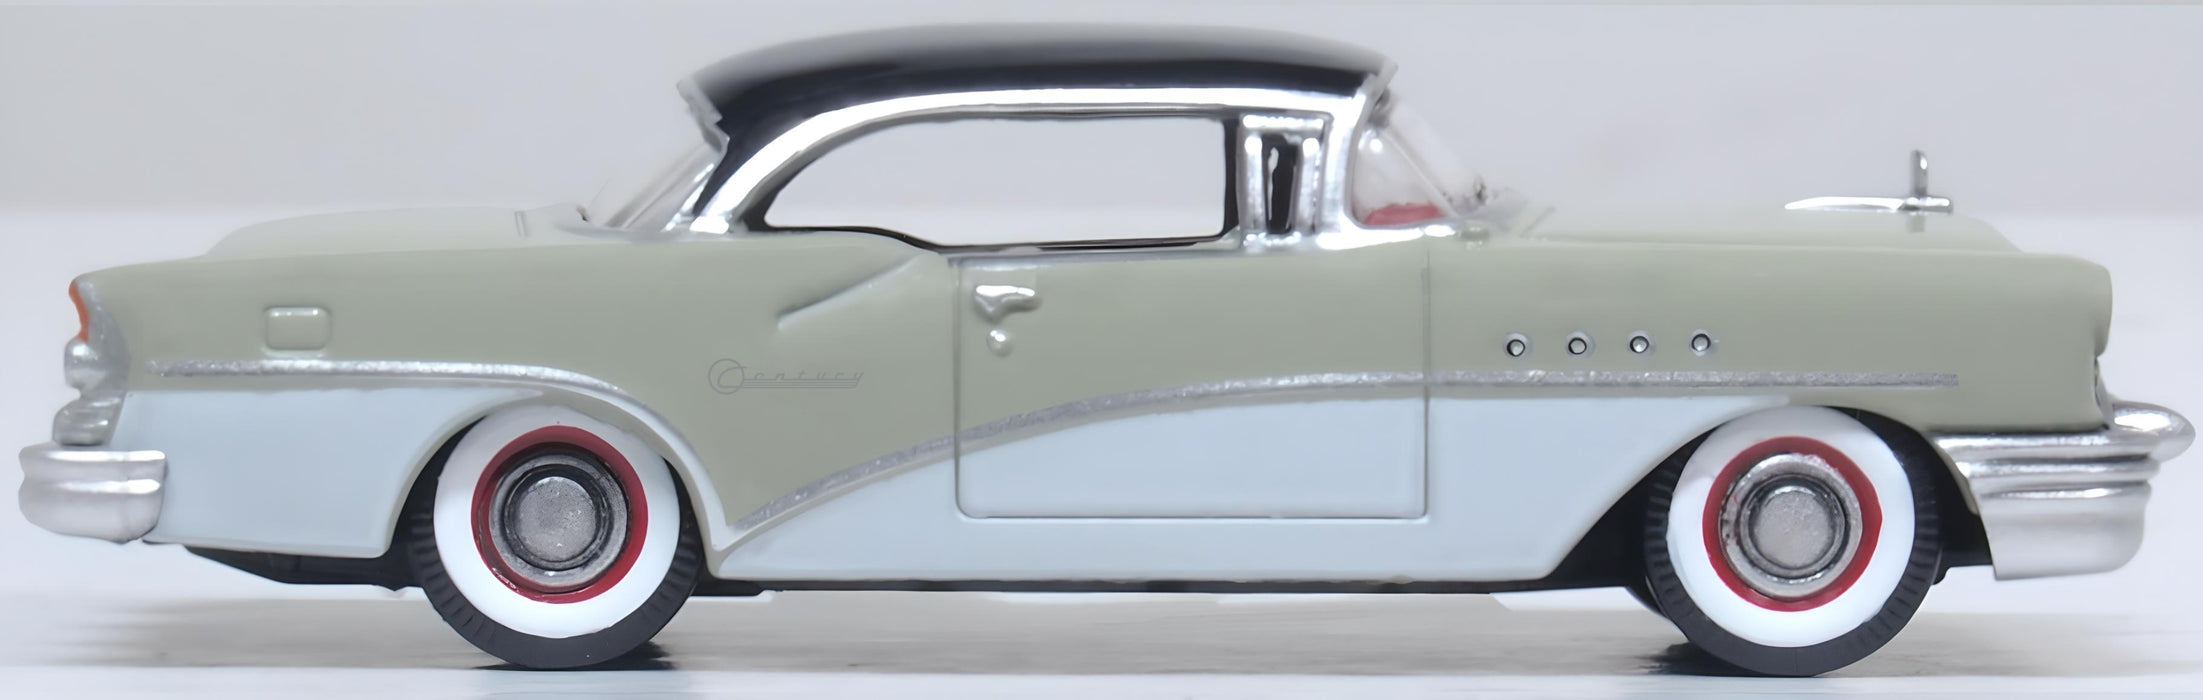 Model of the Buick Century 1955 Carlsbad Black/Windsor Grey/Dover White by Oxford at 1:87 scale right